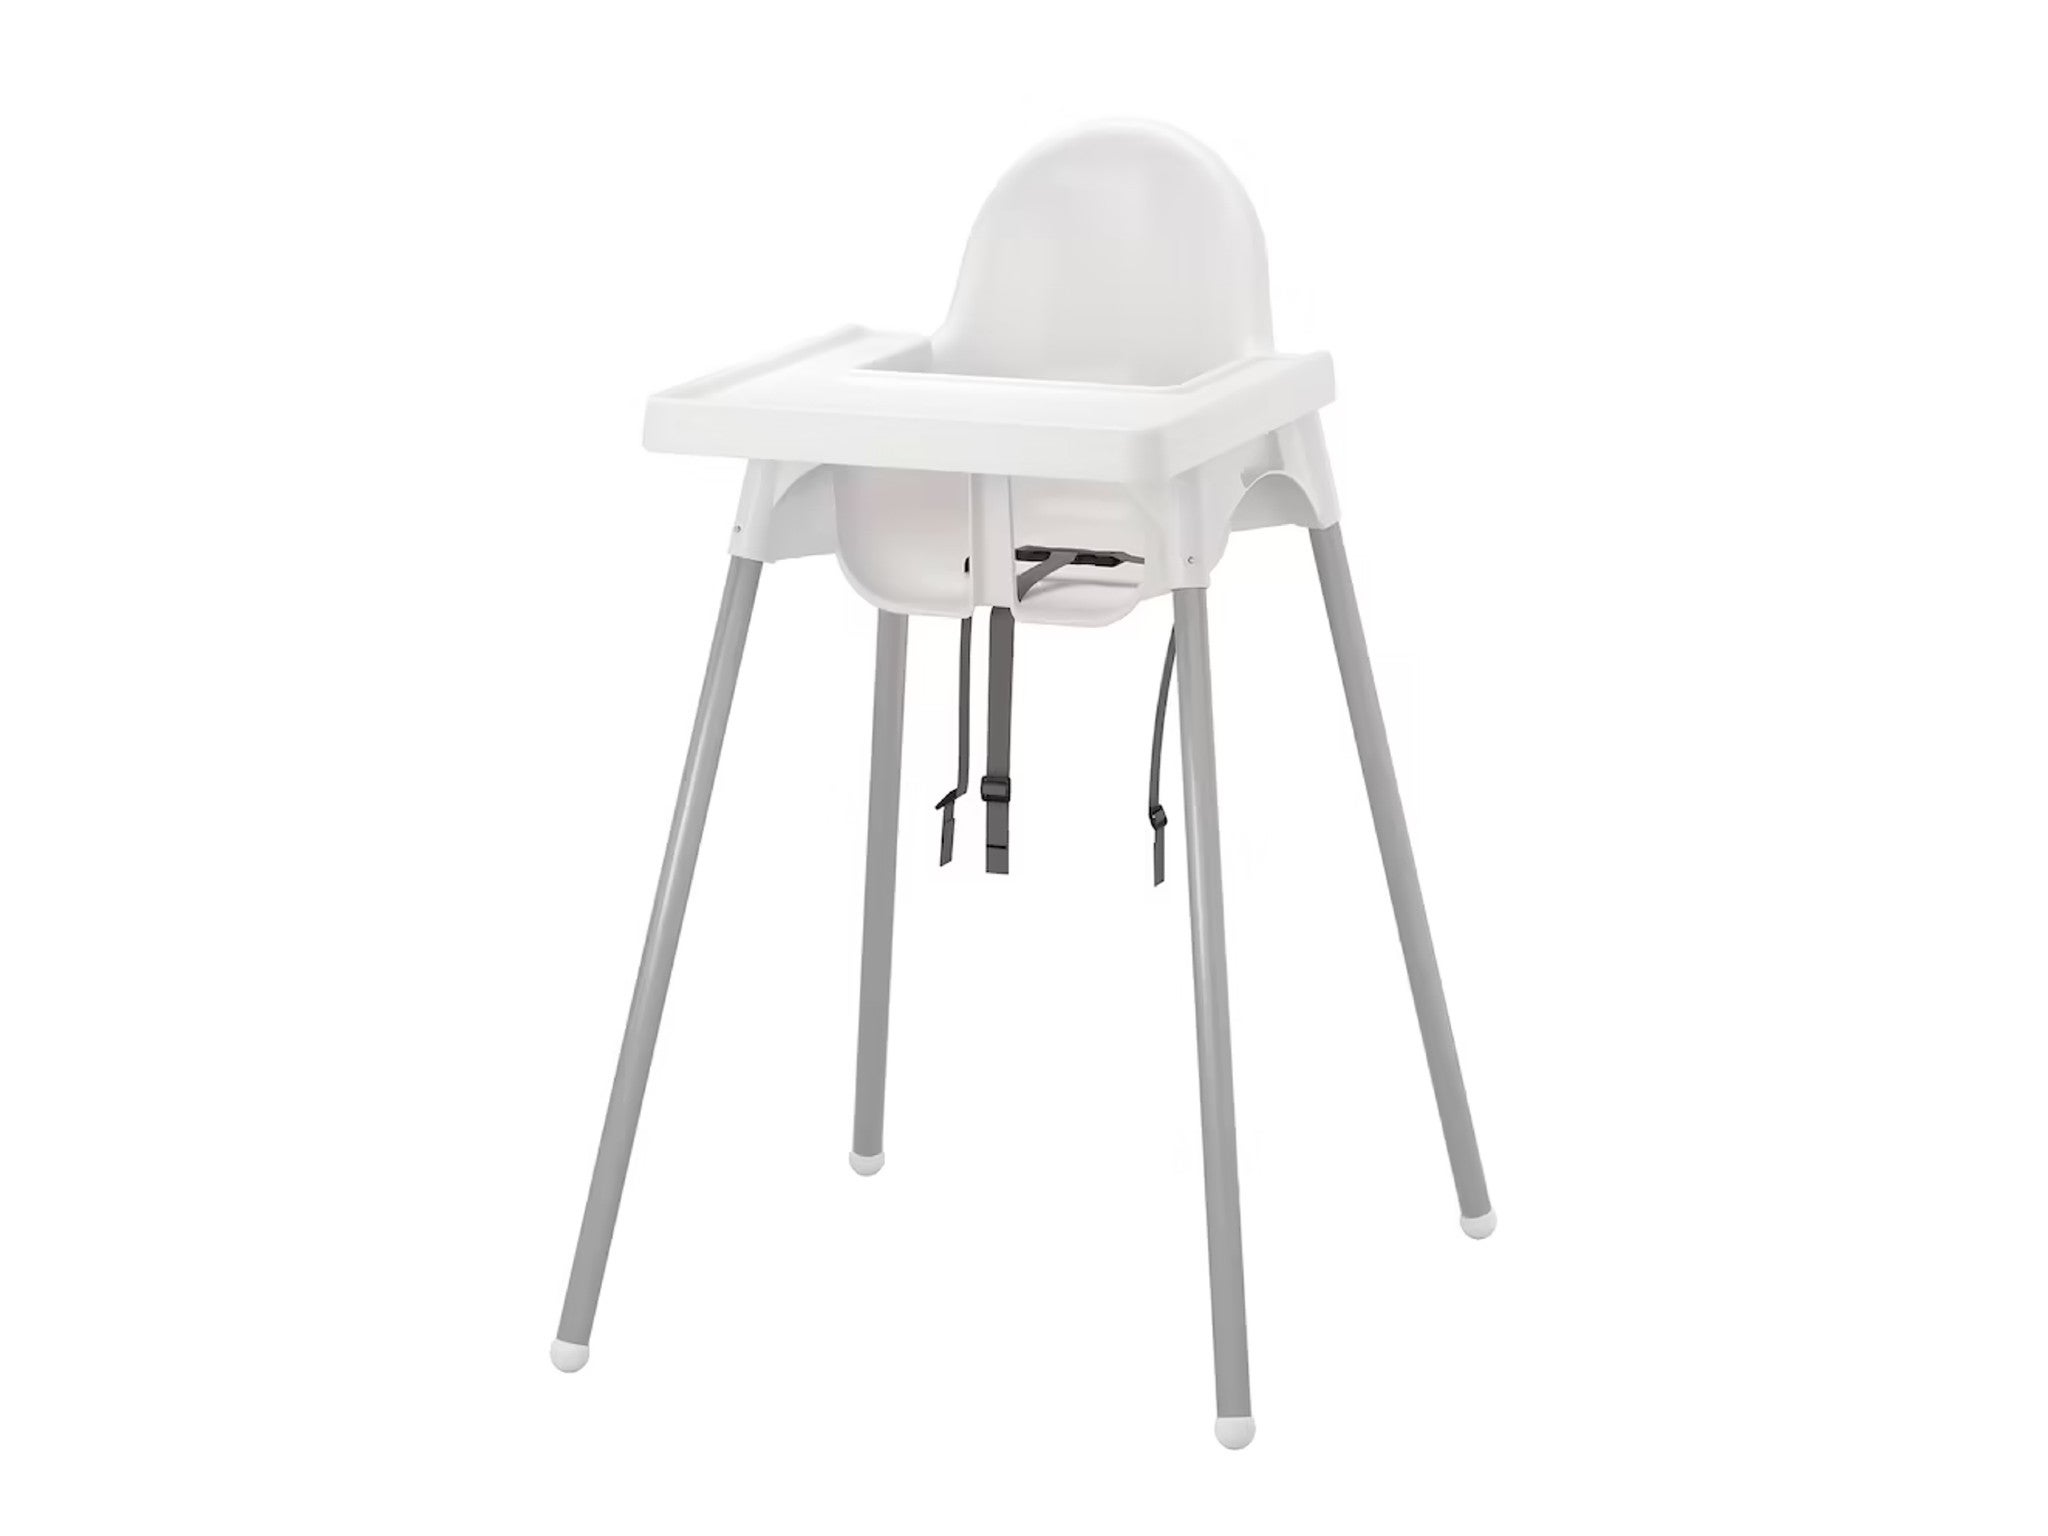 Ikea antilop highchair with tray indybest